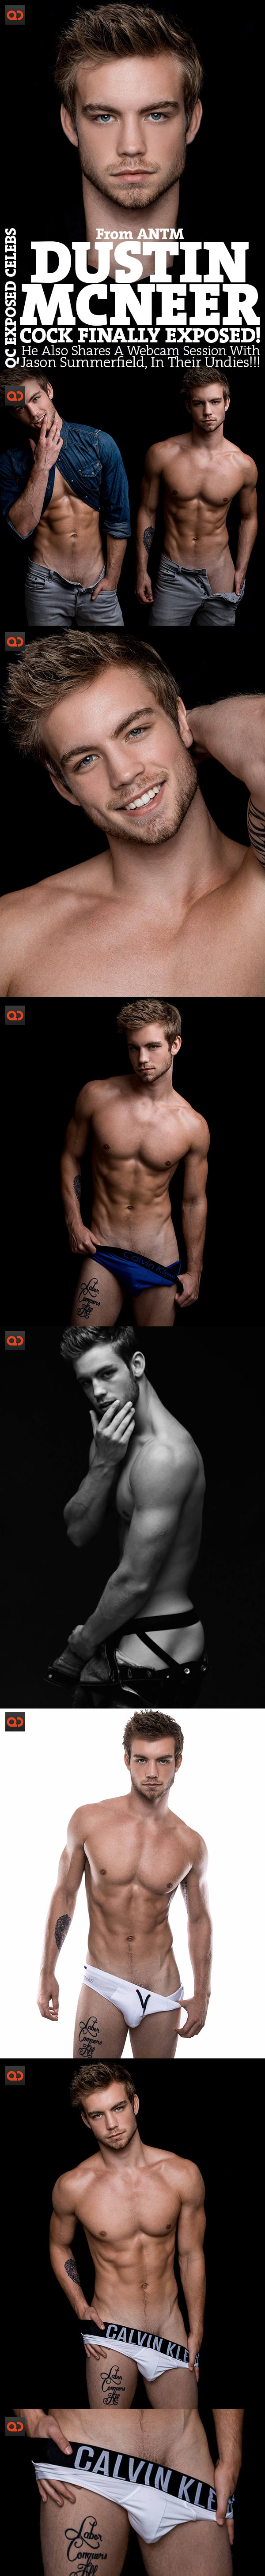 qc-exposed-cock_dustin_mcneer_from_antm-collage01